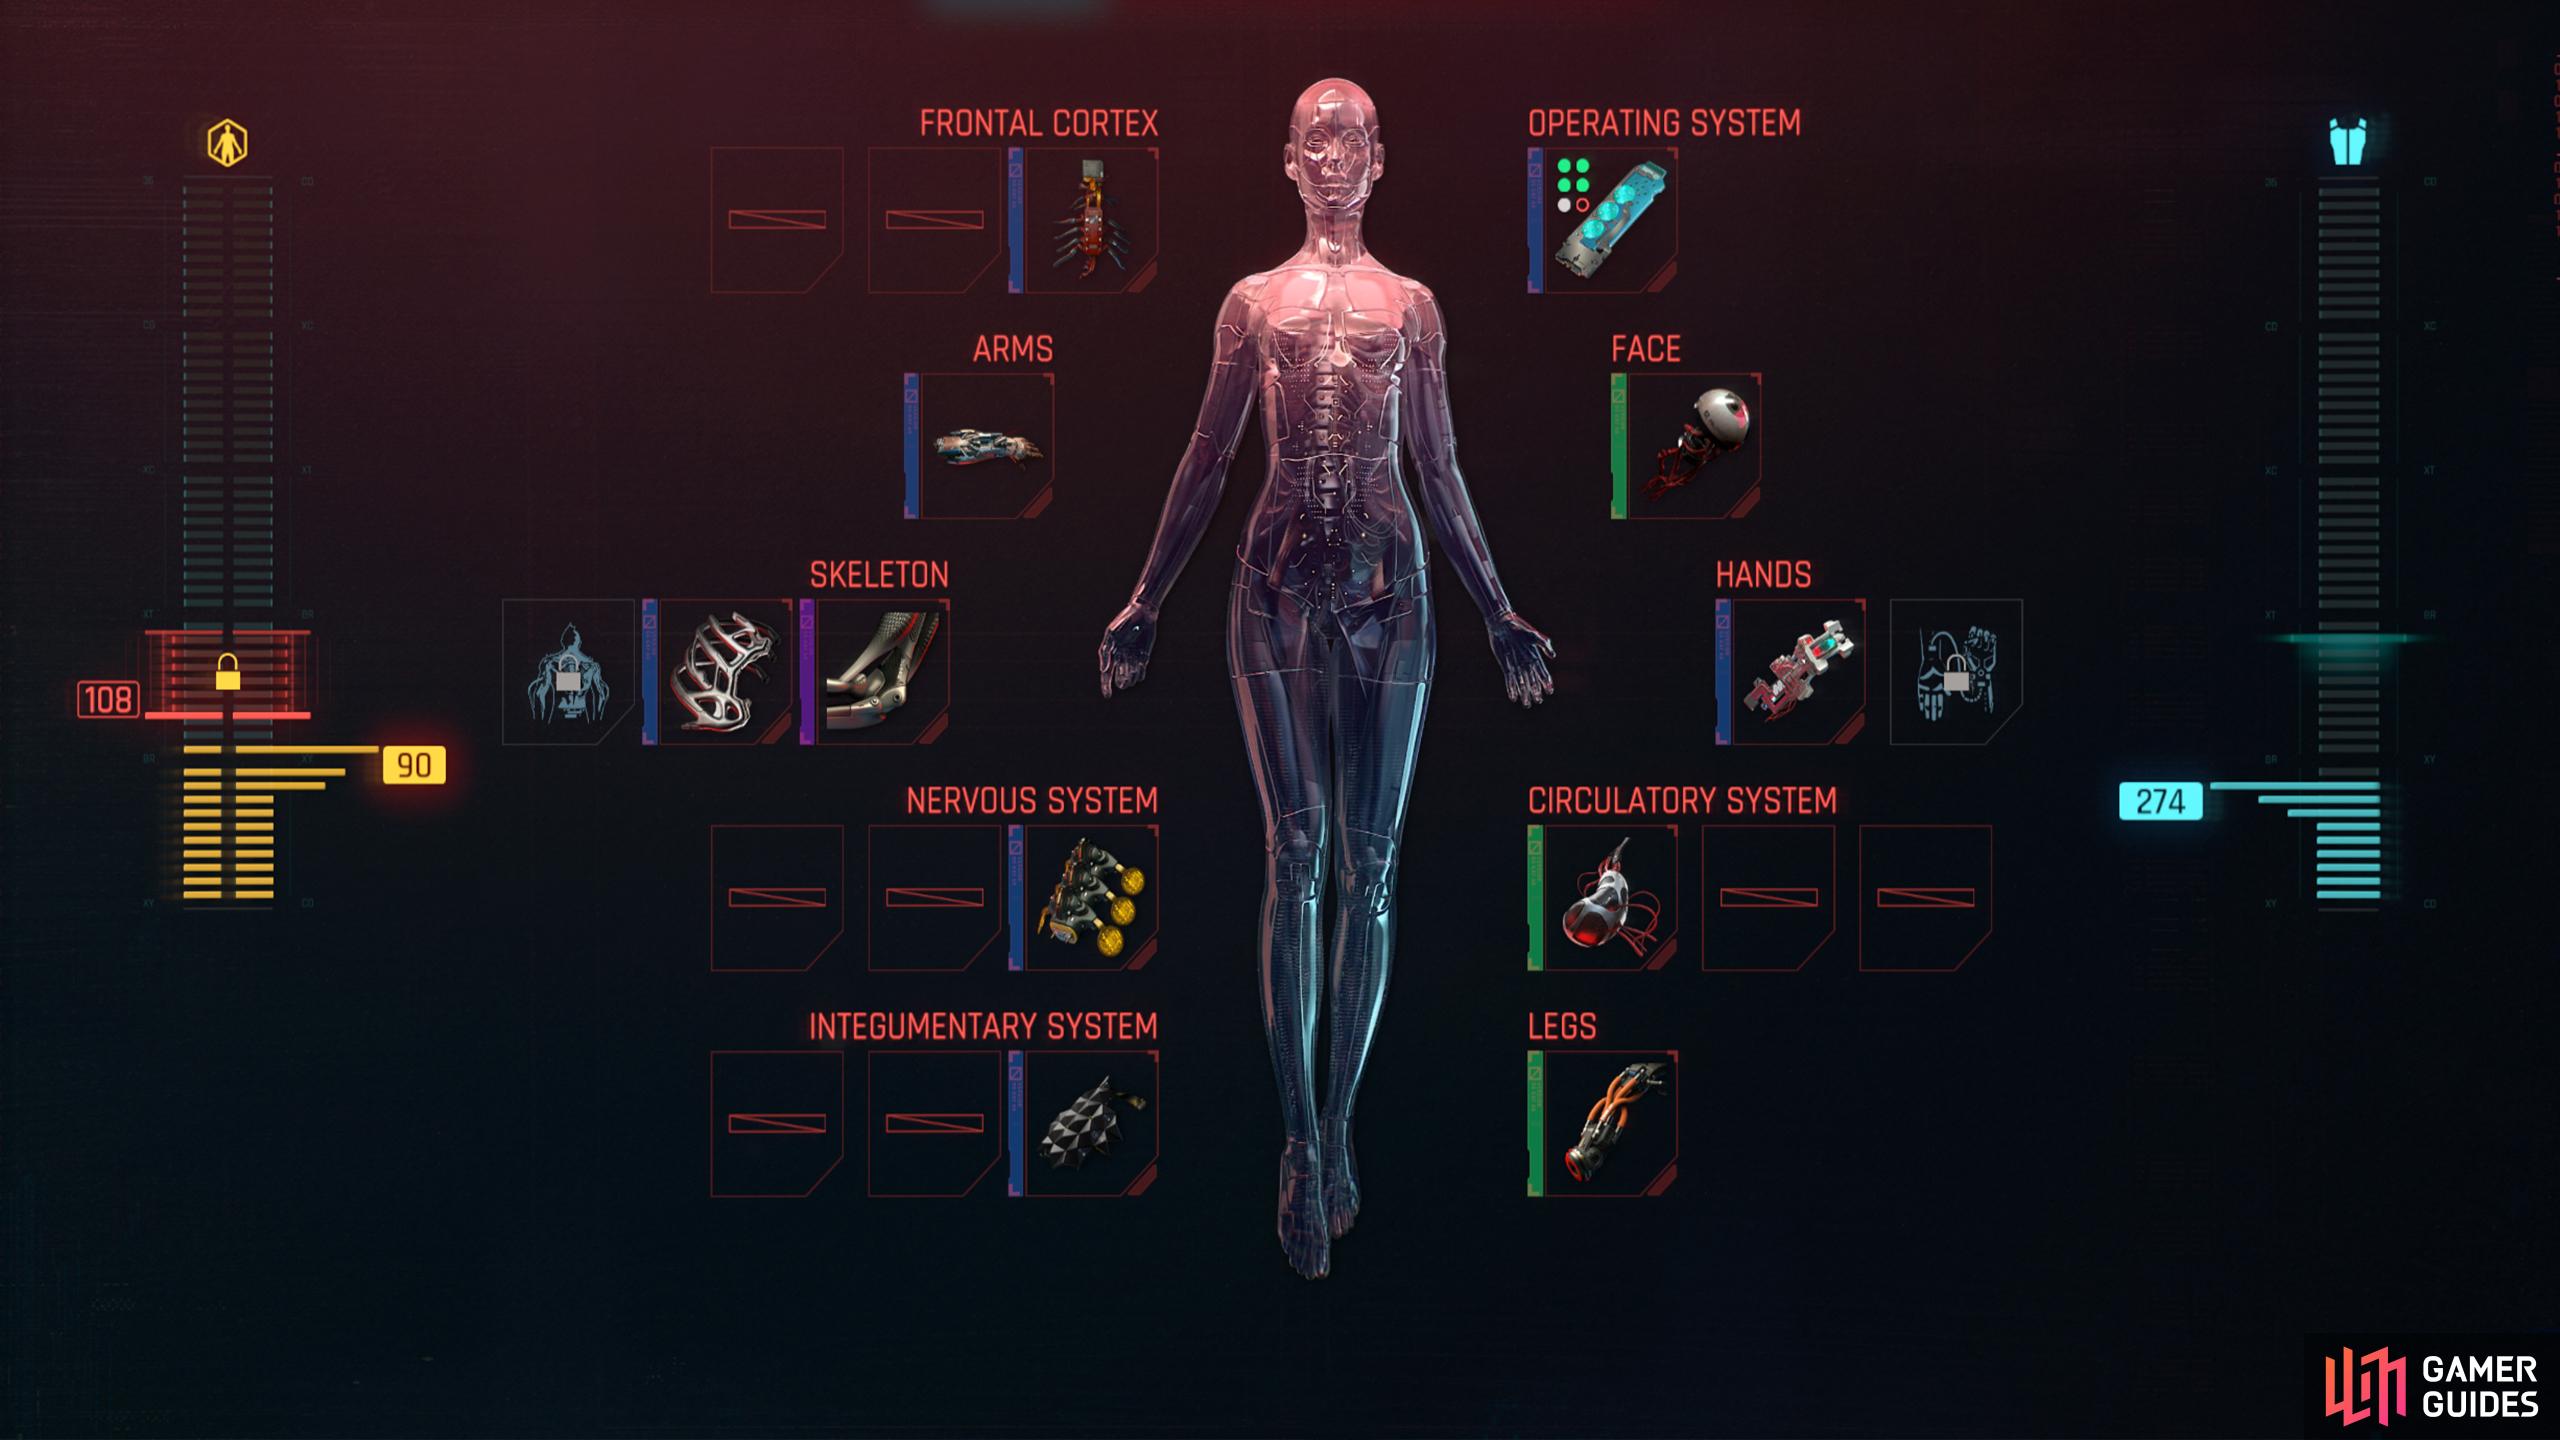 In patch 2.0 of Cyberpunk, Armor and Cyberware are combined.